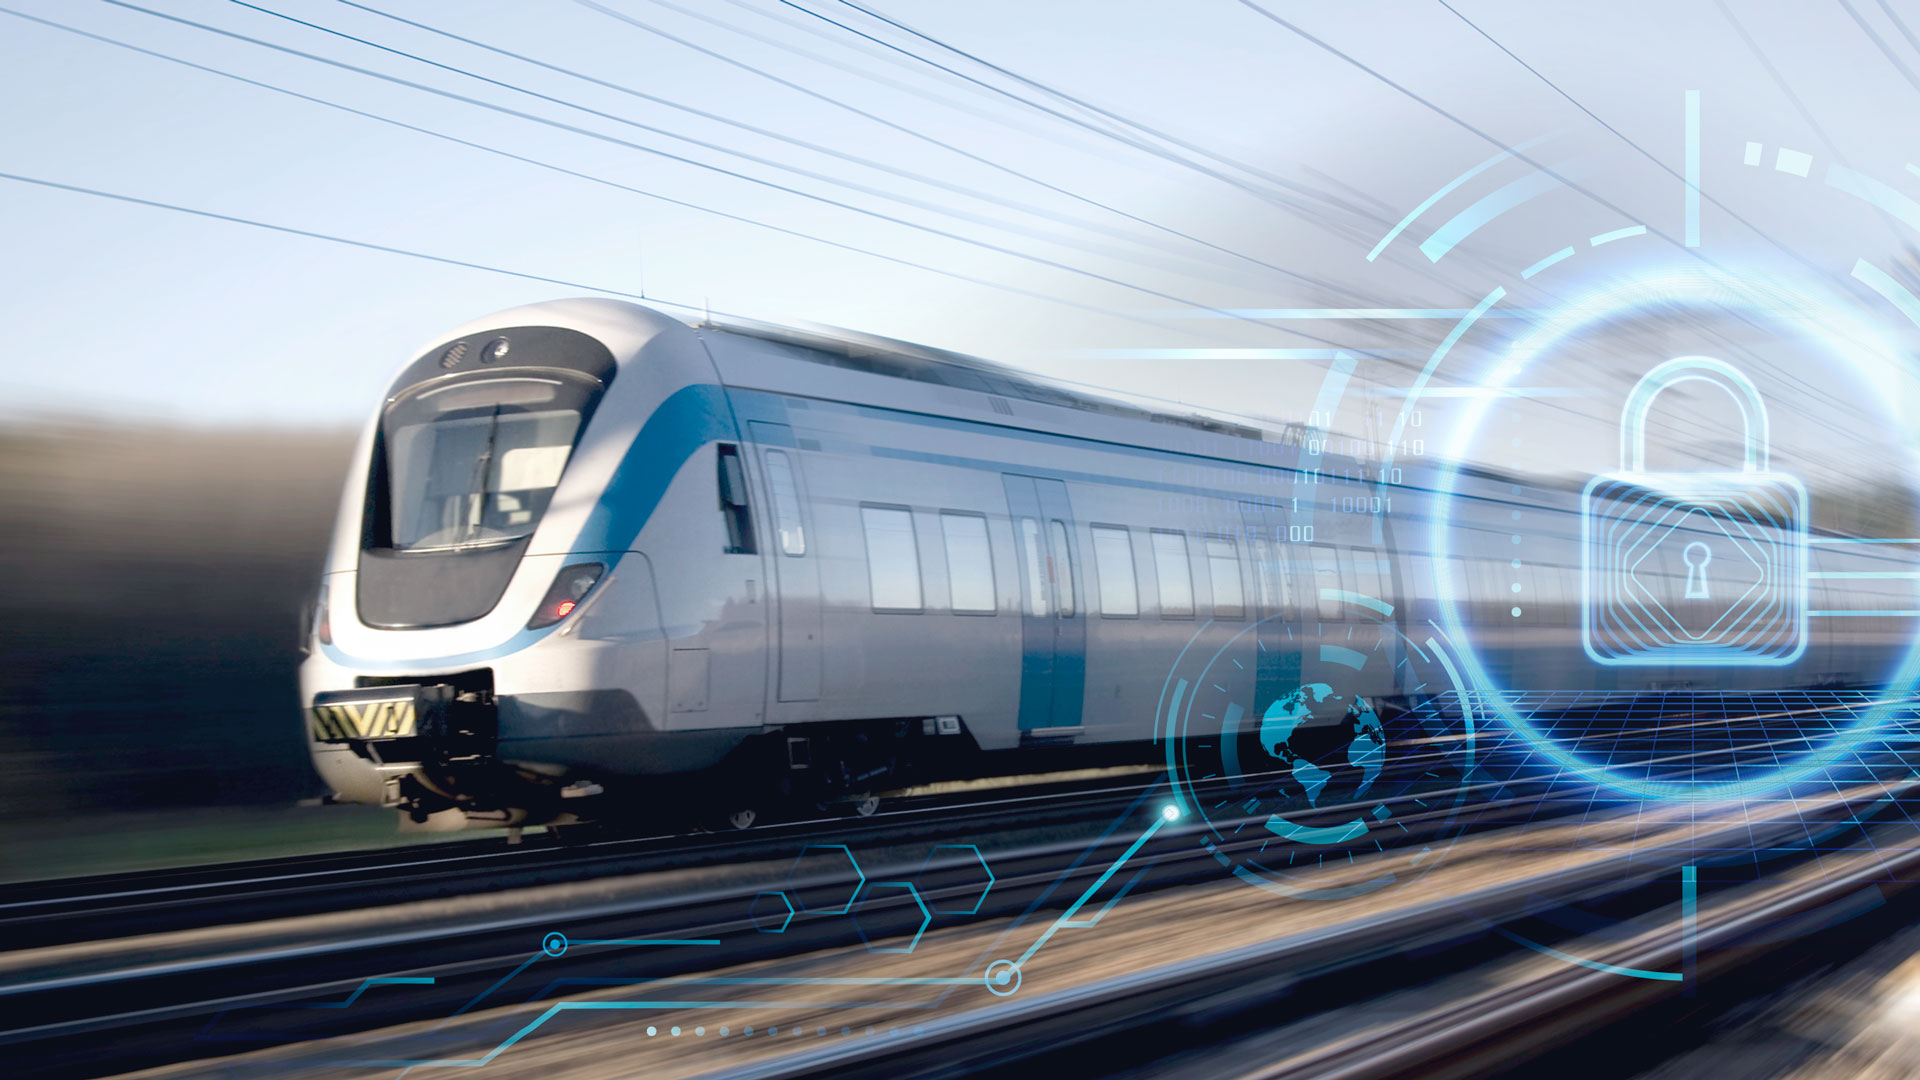 A train travels at high speed through the landscape and on the right side of the image are digital security icons in the form of a graphic lock and an implied fingerprint